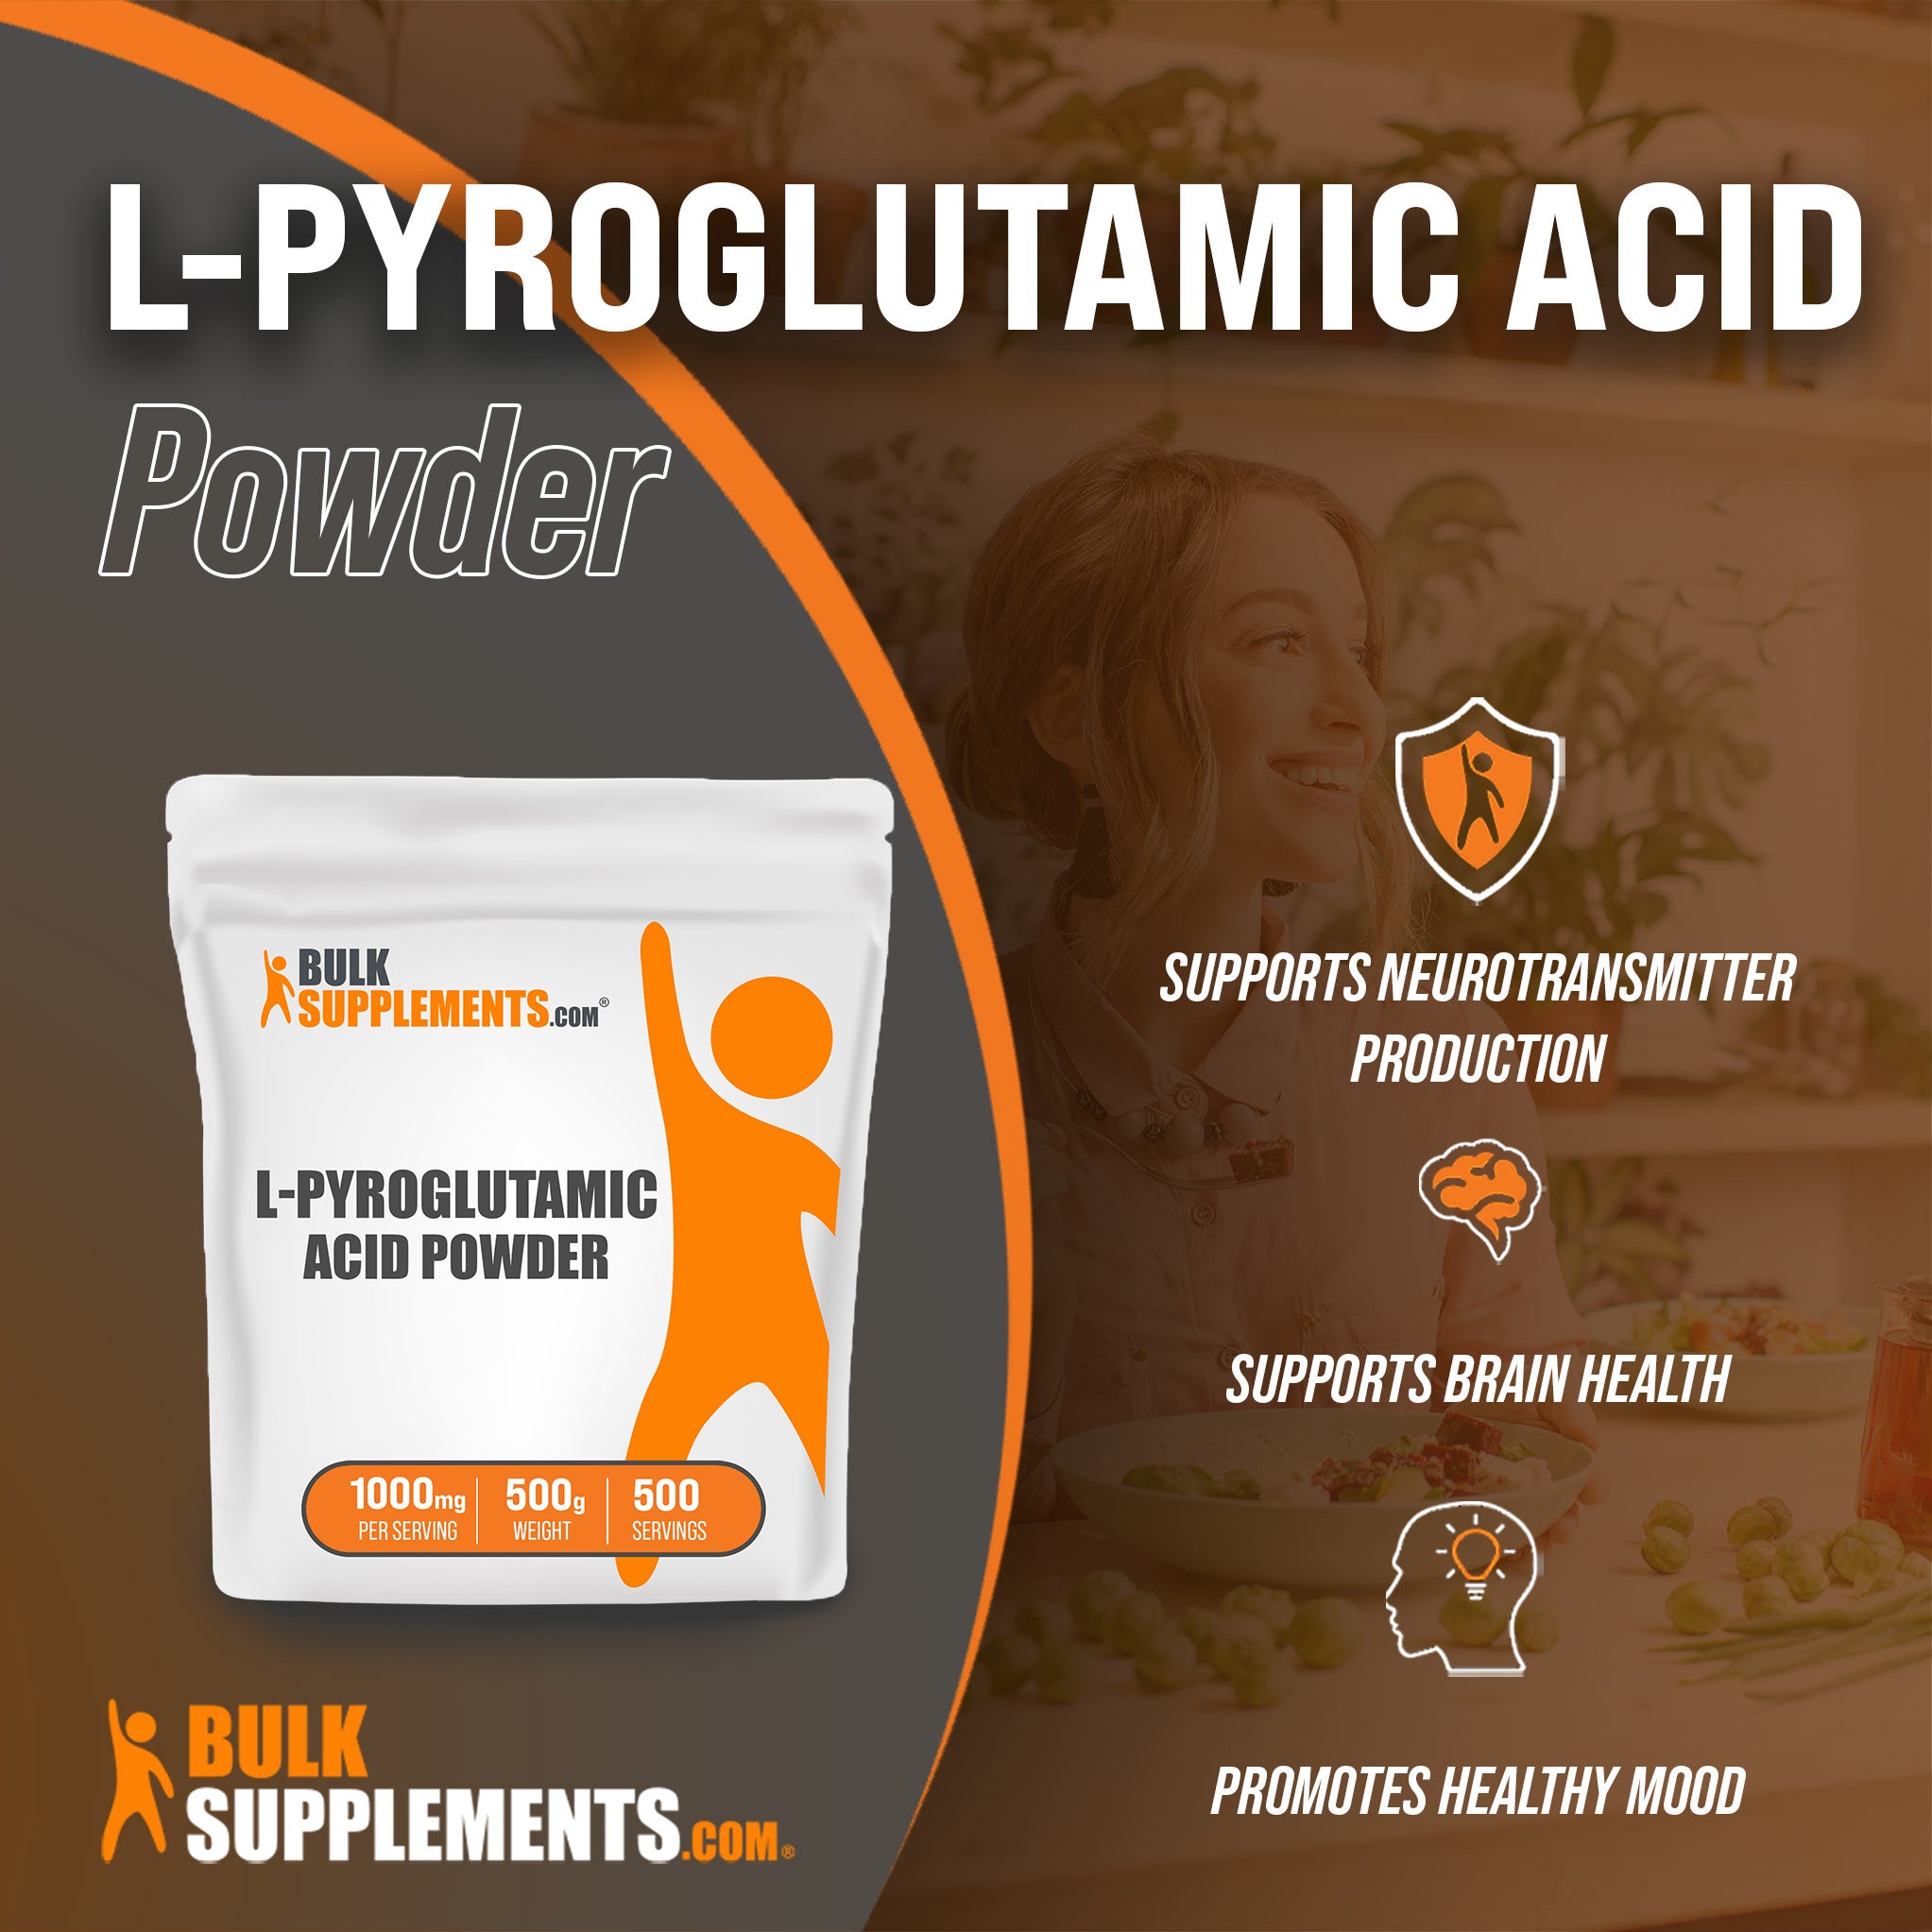 Benefits of L-Pyroglutamic Acid: supports neurotransmitter production, supports brain health, promotes healthy mood